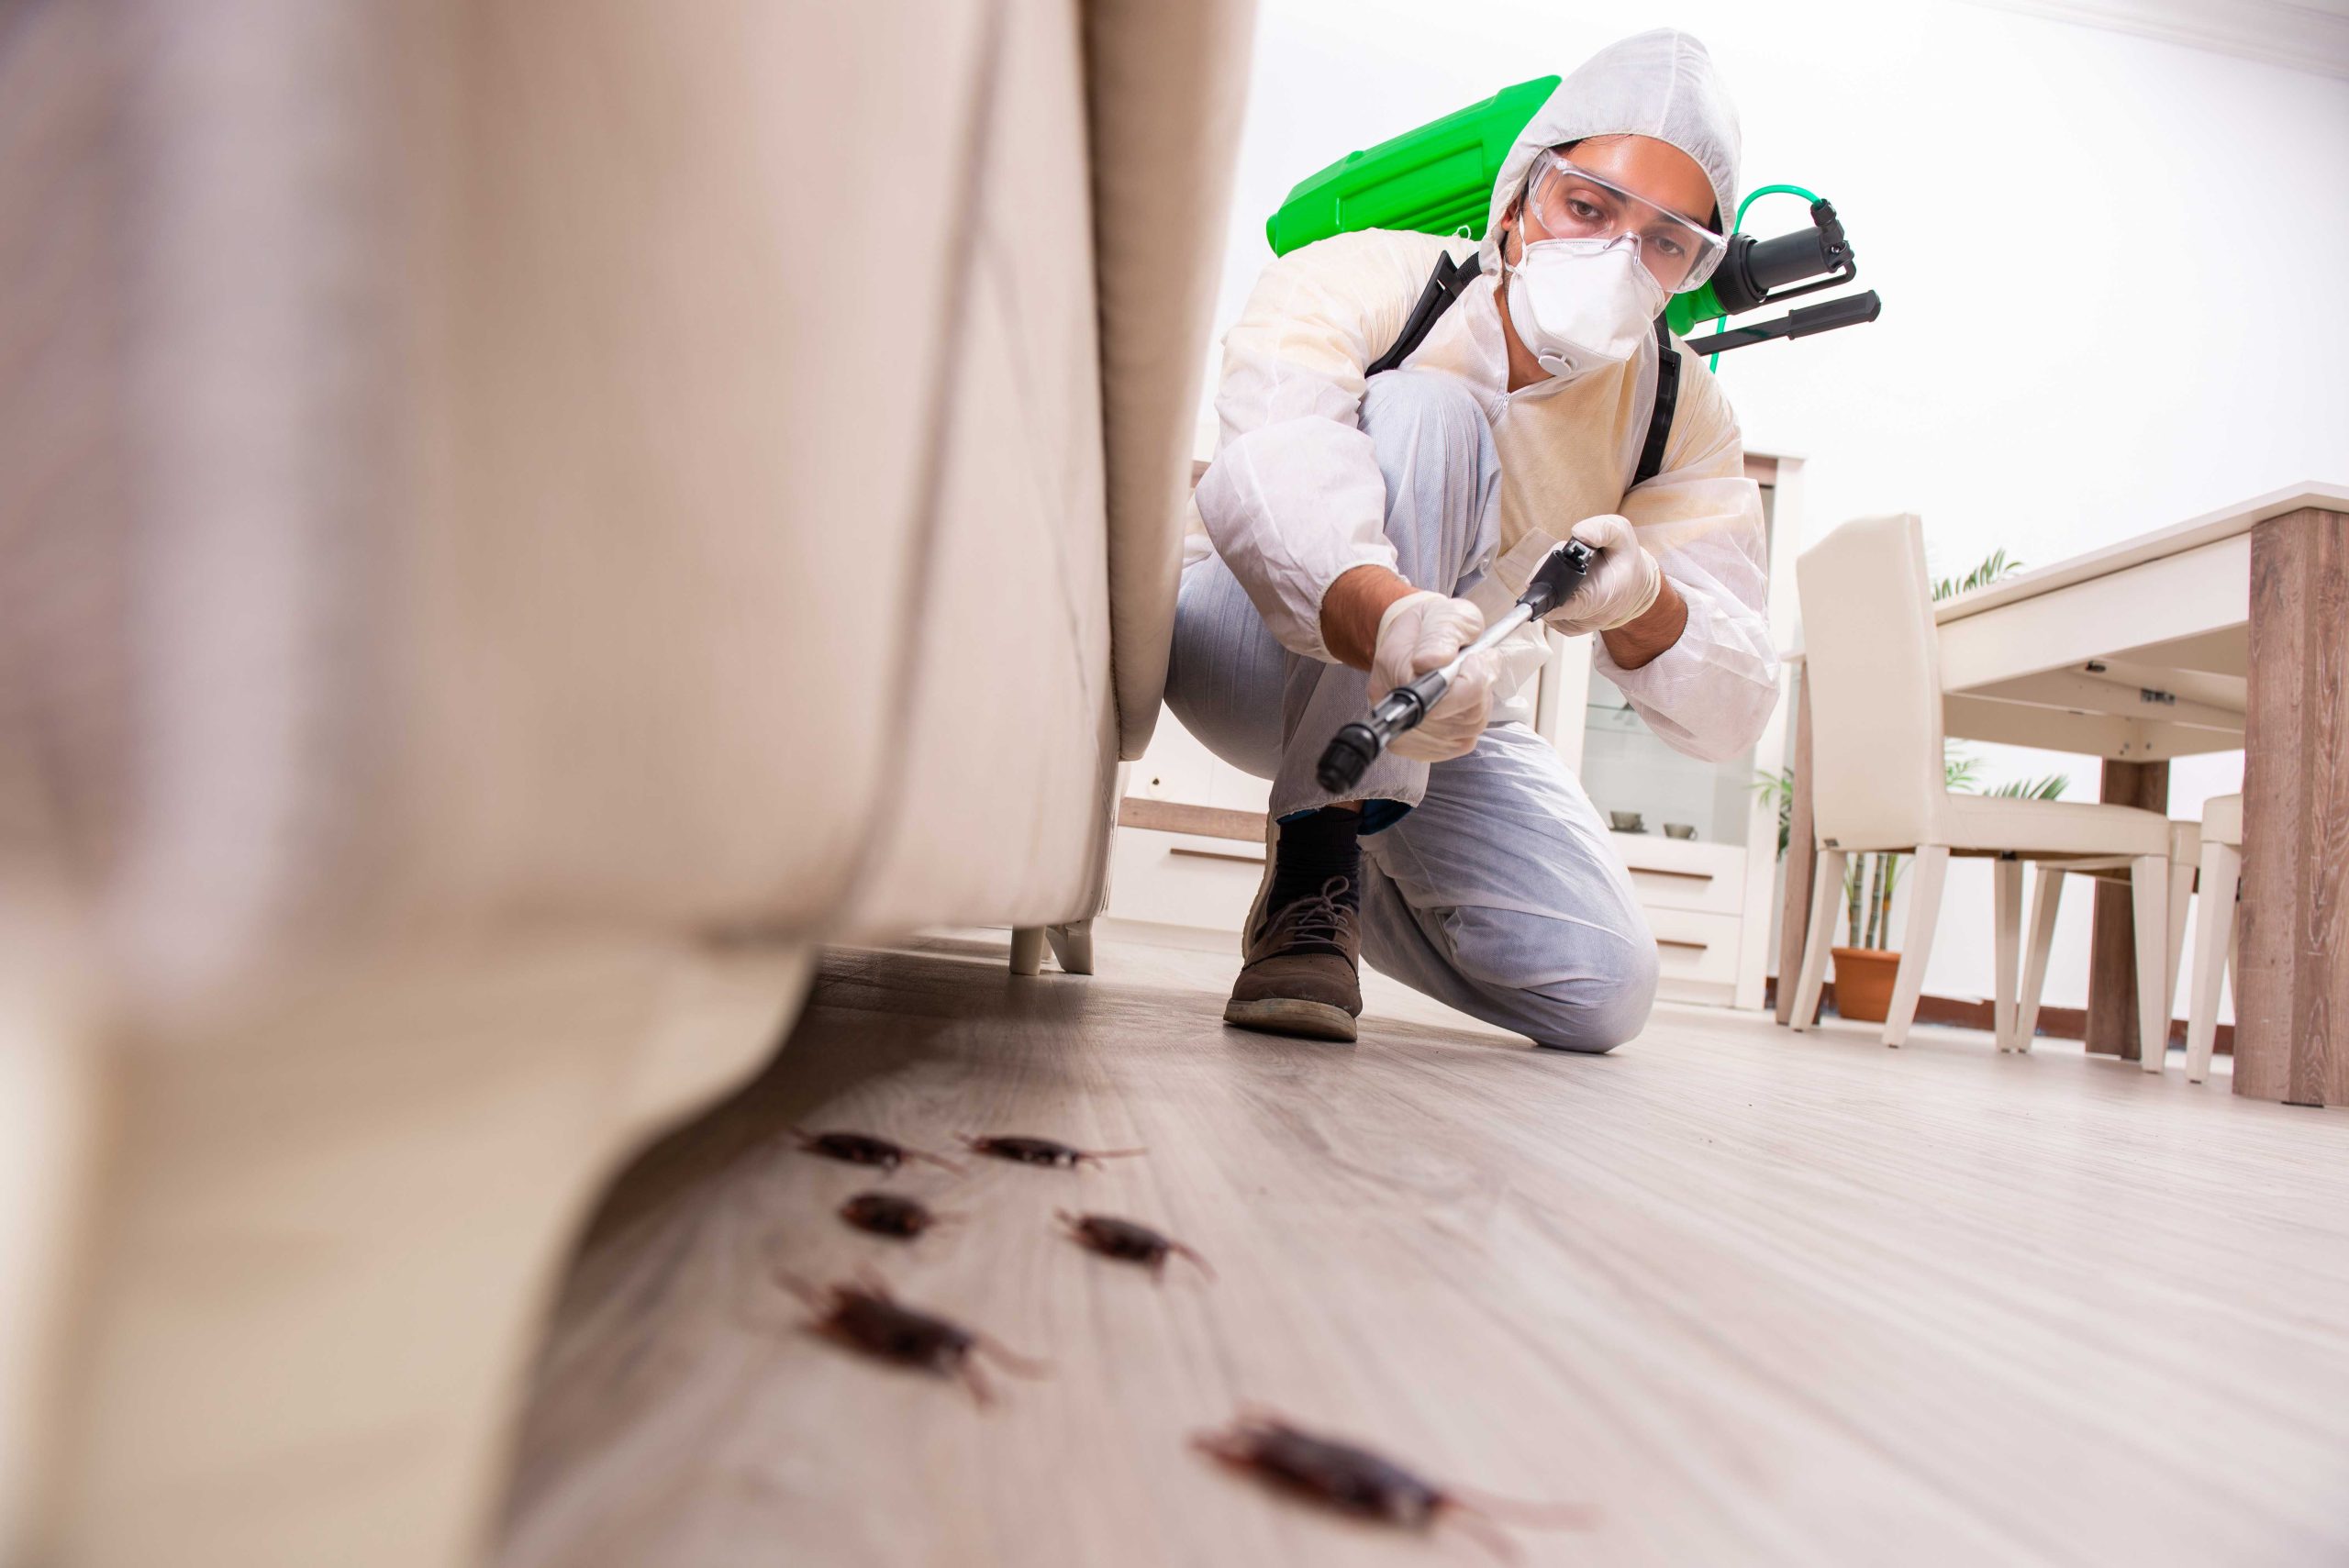 Pest-Control experts in Nashville specializing in prevention and eradication of various pests. Don't let pests damage your property and endanger your health.